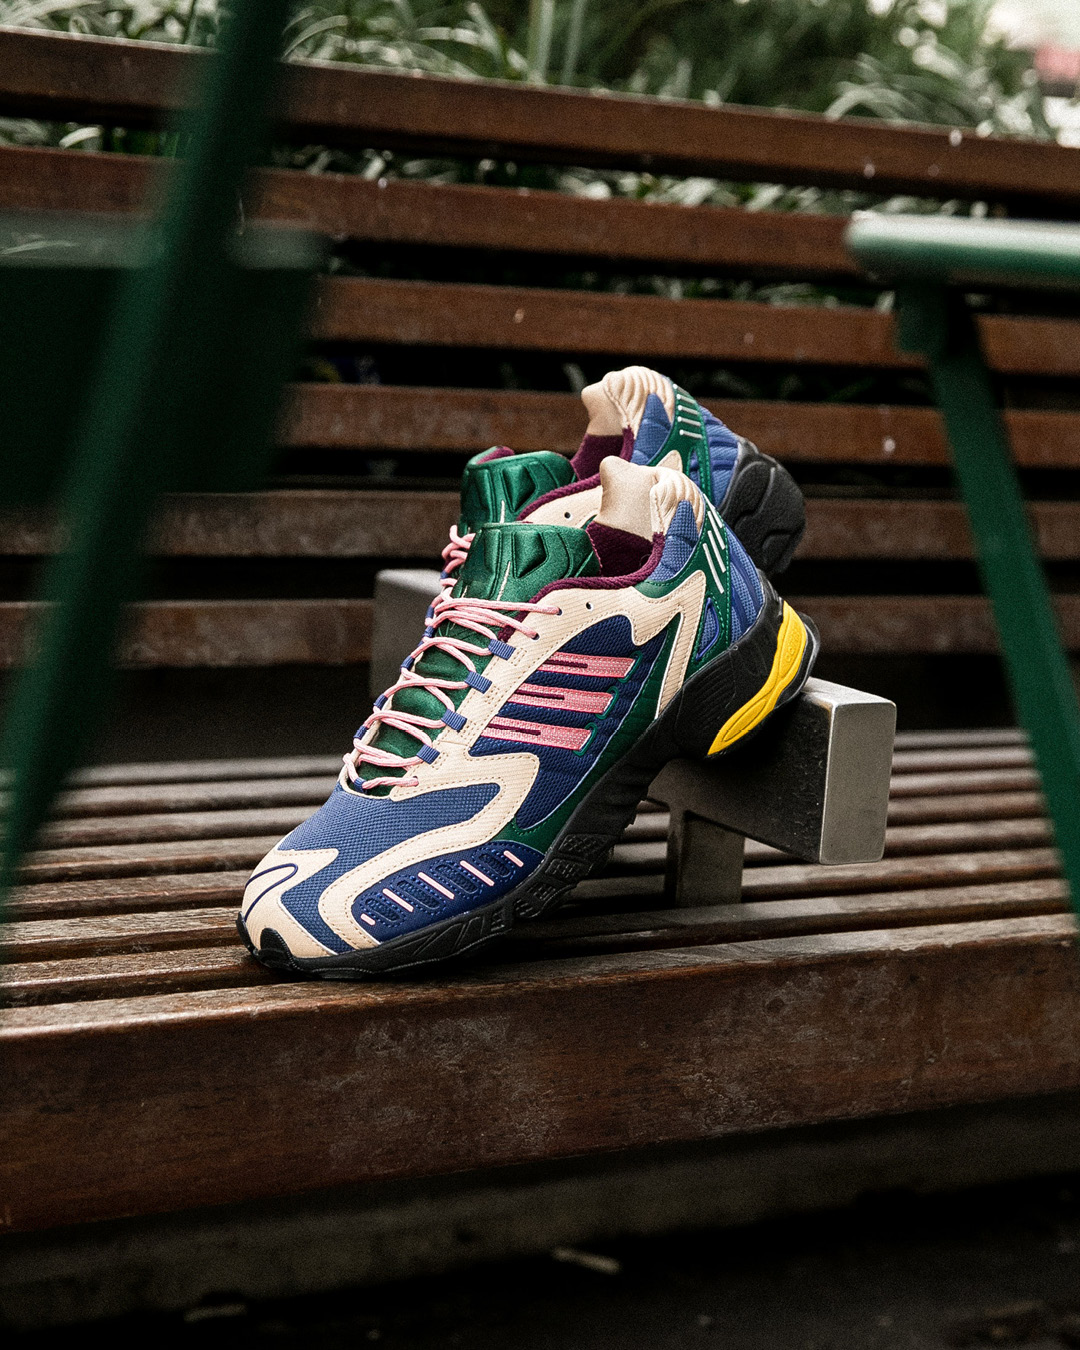 West NYC on Twitter: "Initially released as an update to the early-2000s @ adidas #Torsion Trediac #trailrunner, the TRDC adopts its predecessor's rugged, aggressive attitude. Available in Tech Indigo/Glory Pink/Collegiate Green, online